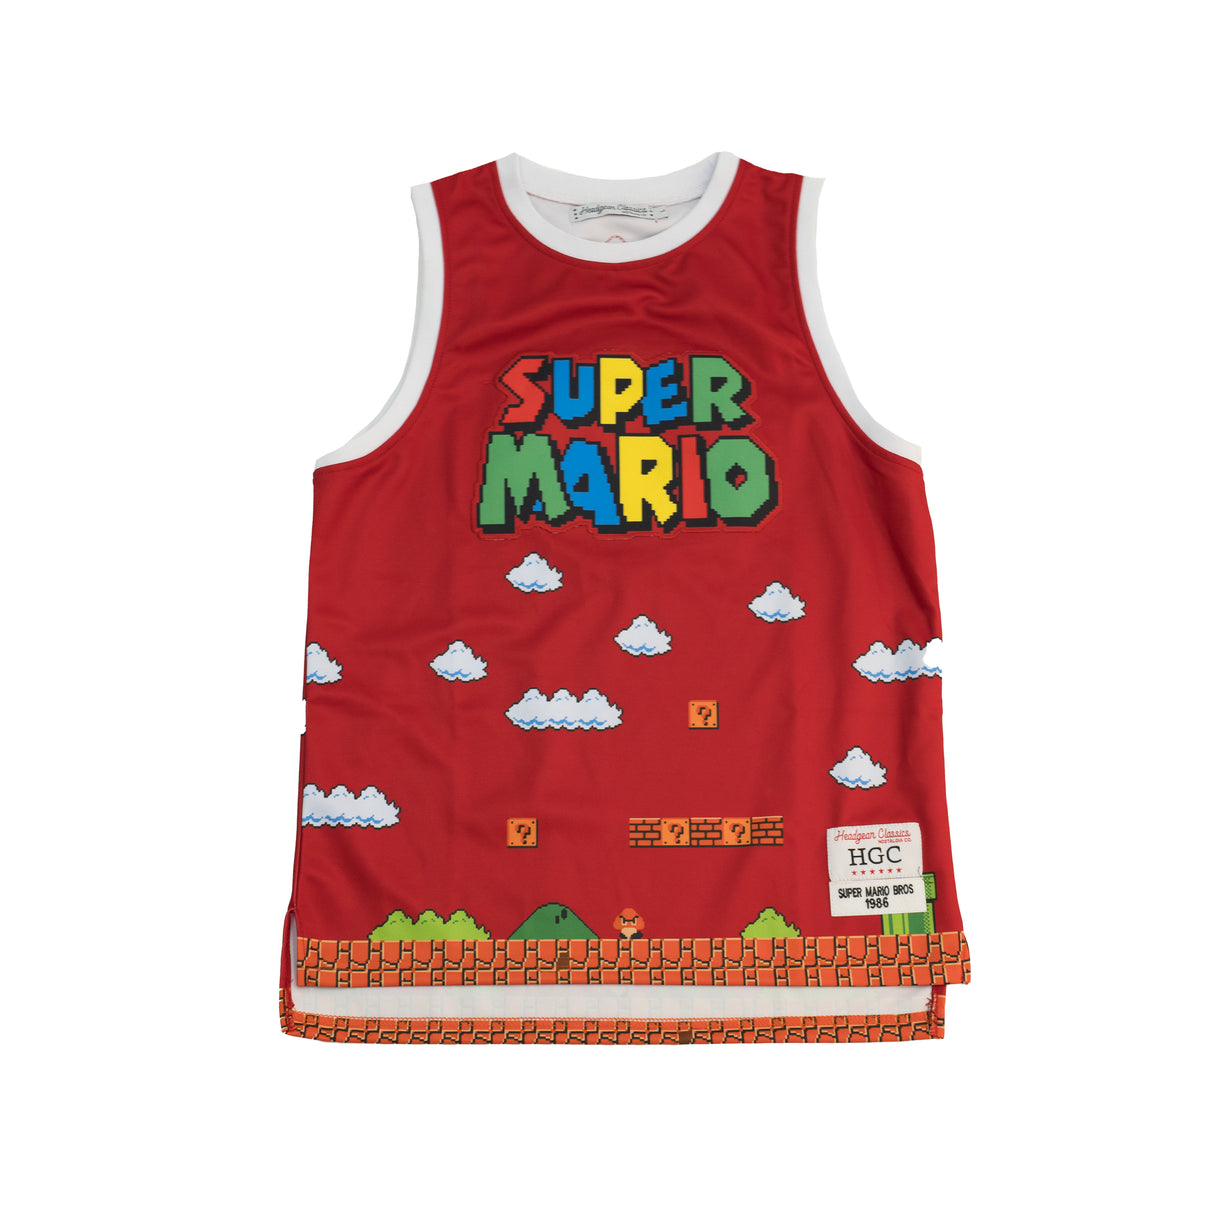 SUPER MARIO YOUTH BASKETBALL JERSEY (RED)